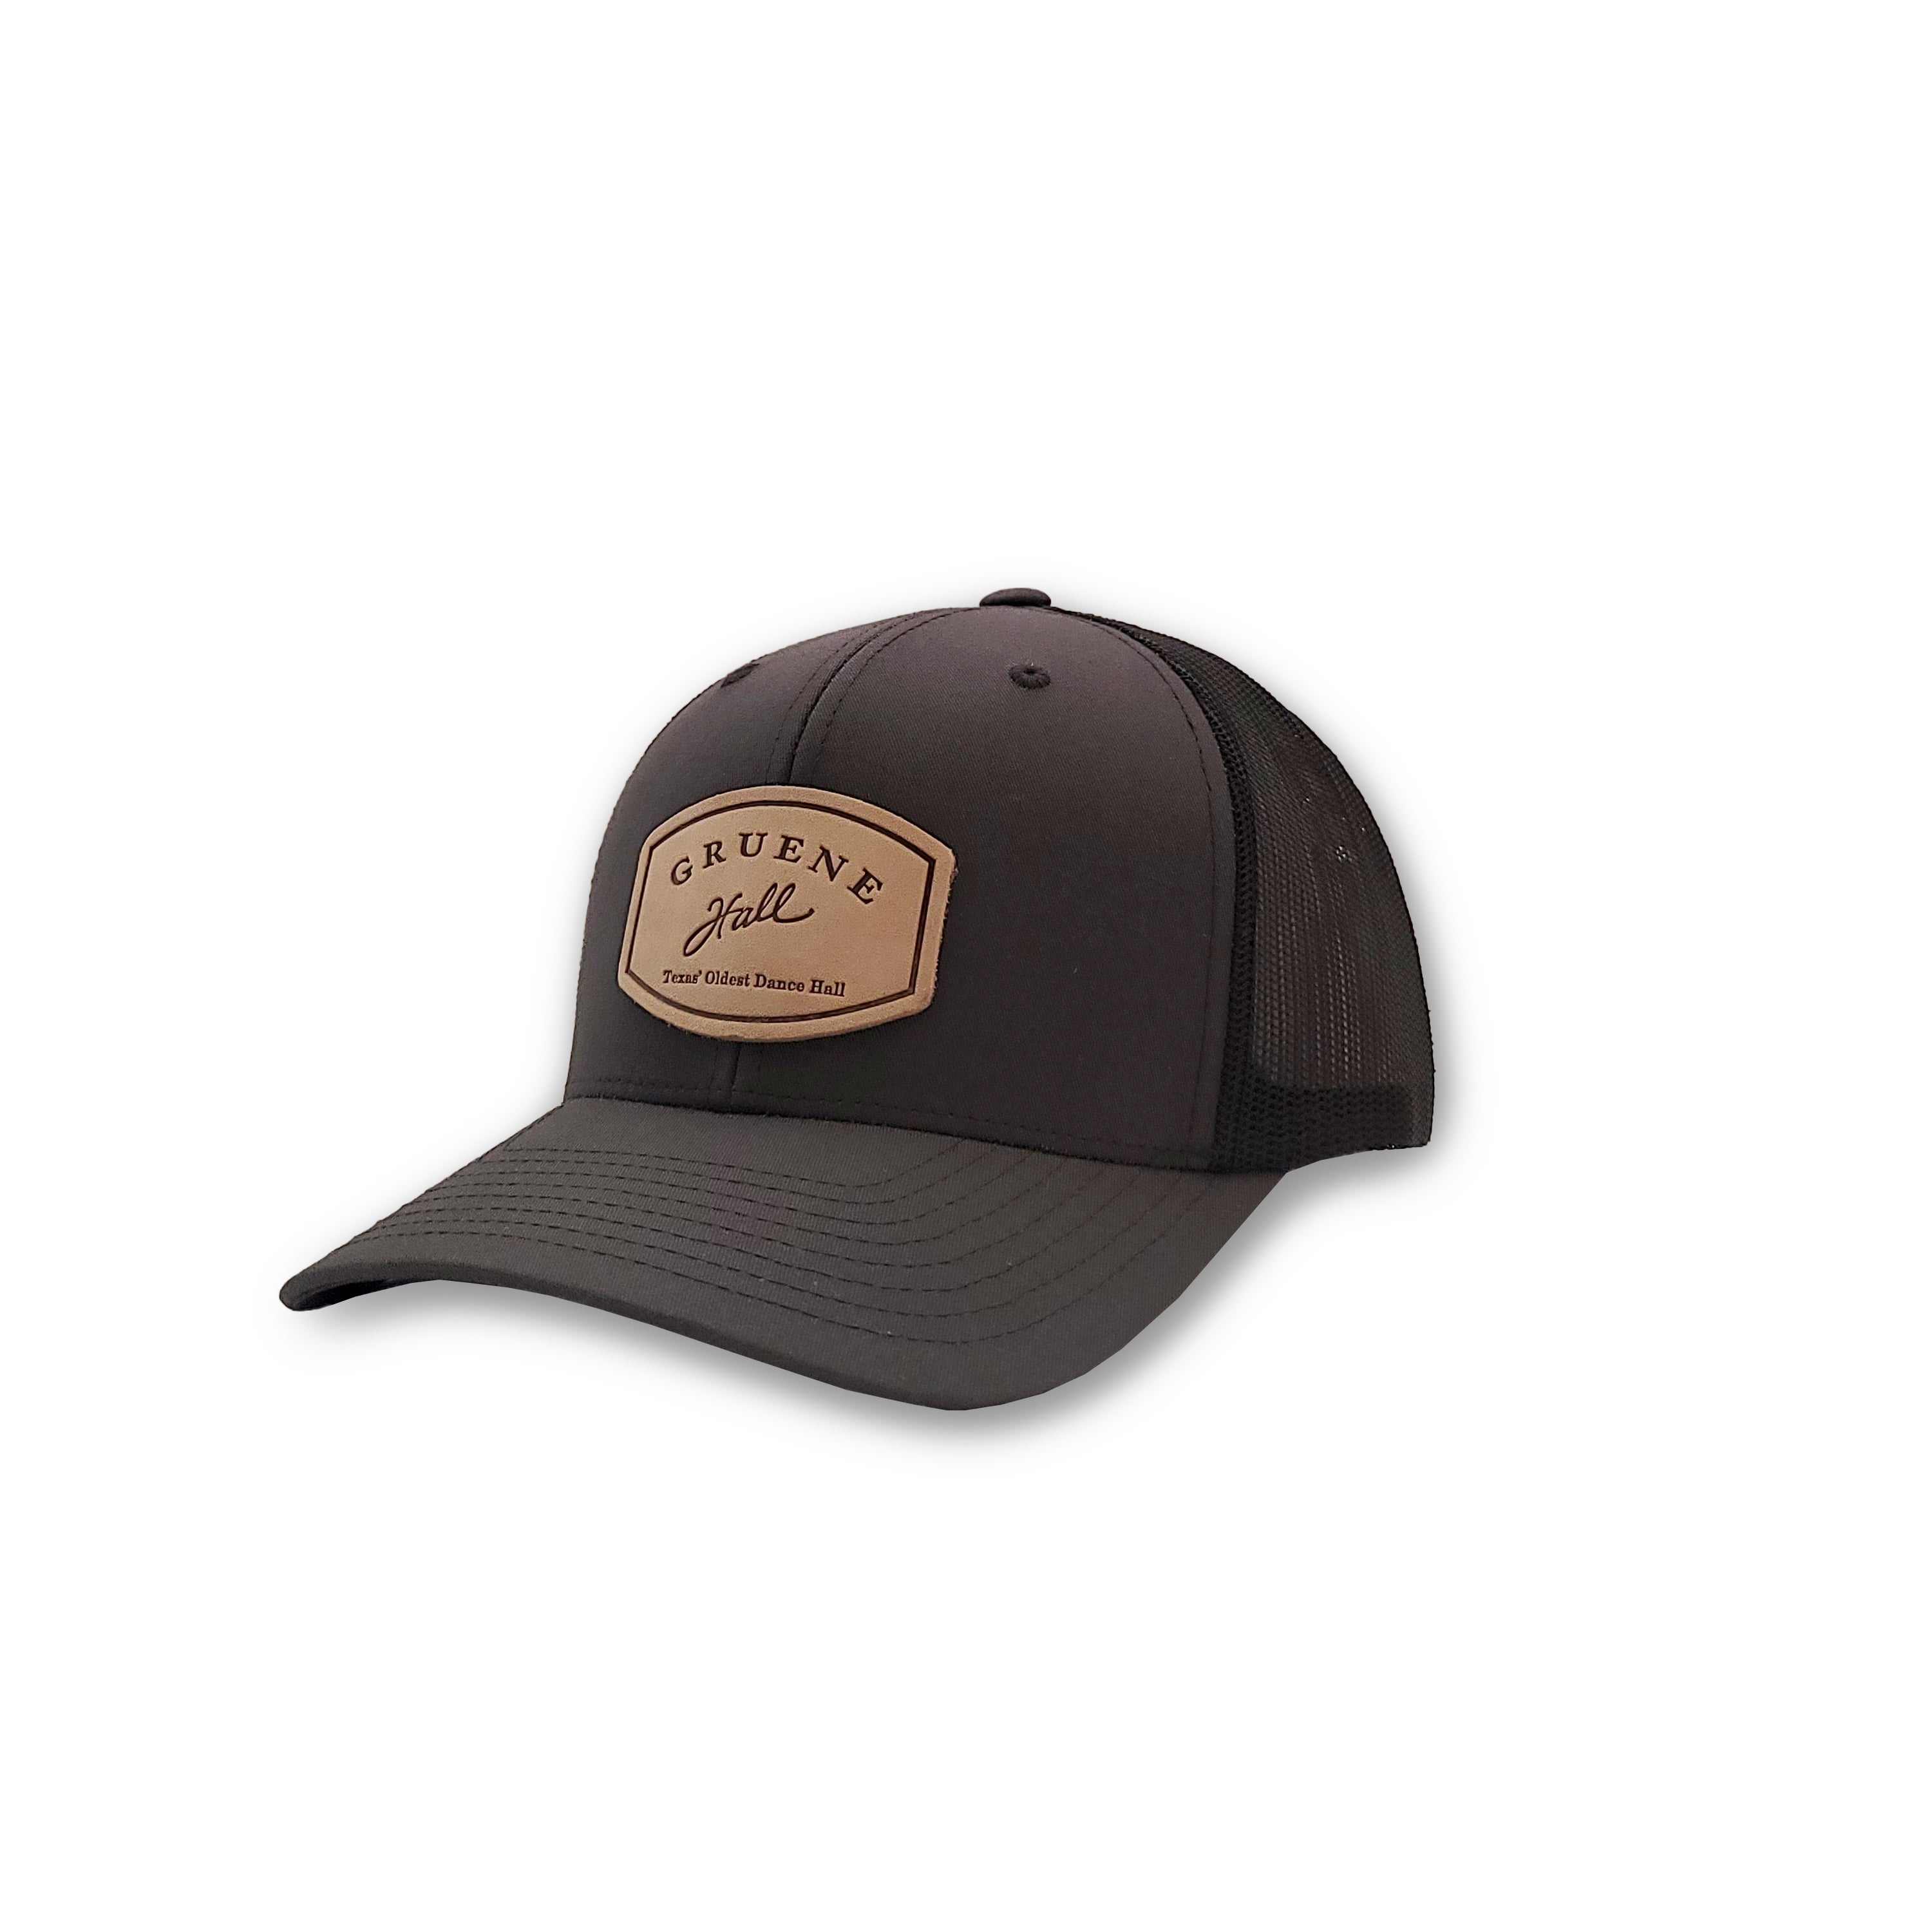 Gruene Hall Leather Patch hat by Range Leather Co.